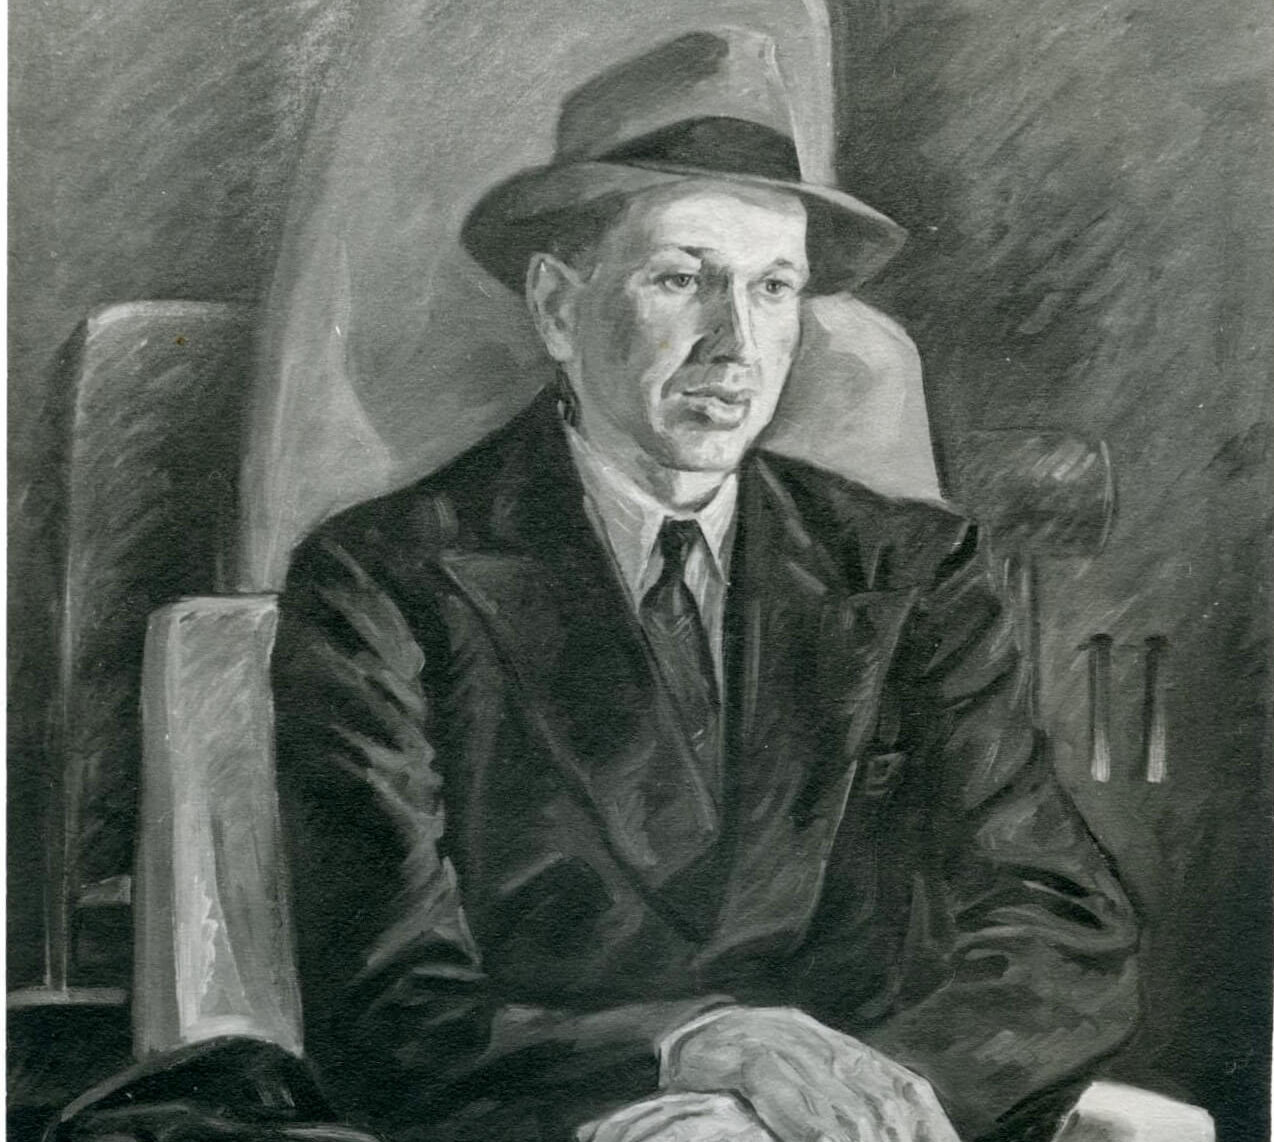 Portrait of a man sitting with his arms crossed across his knee wearing a suit and hat